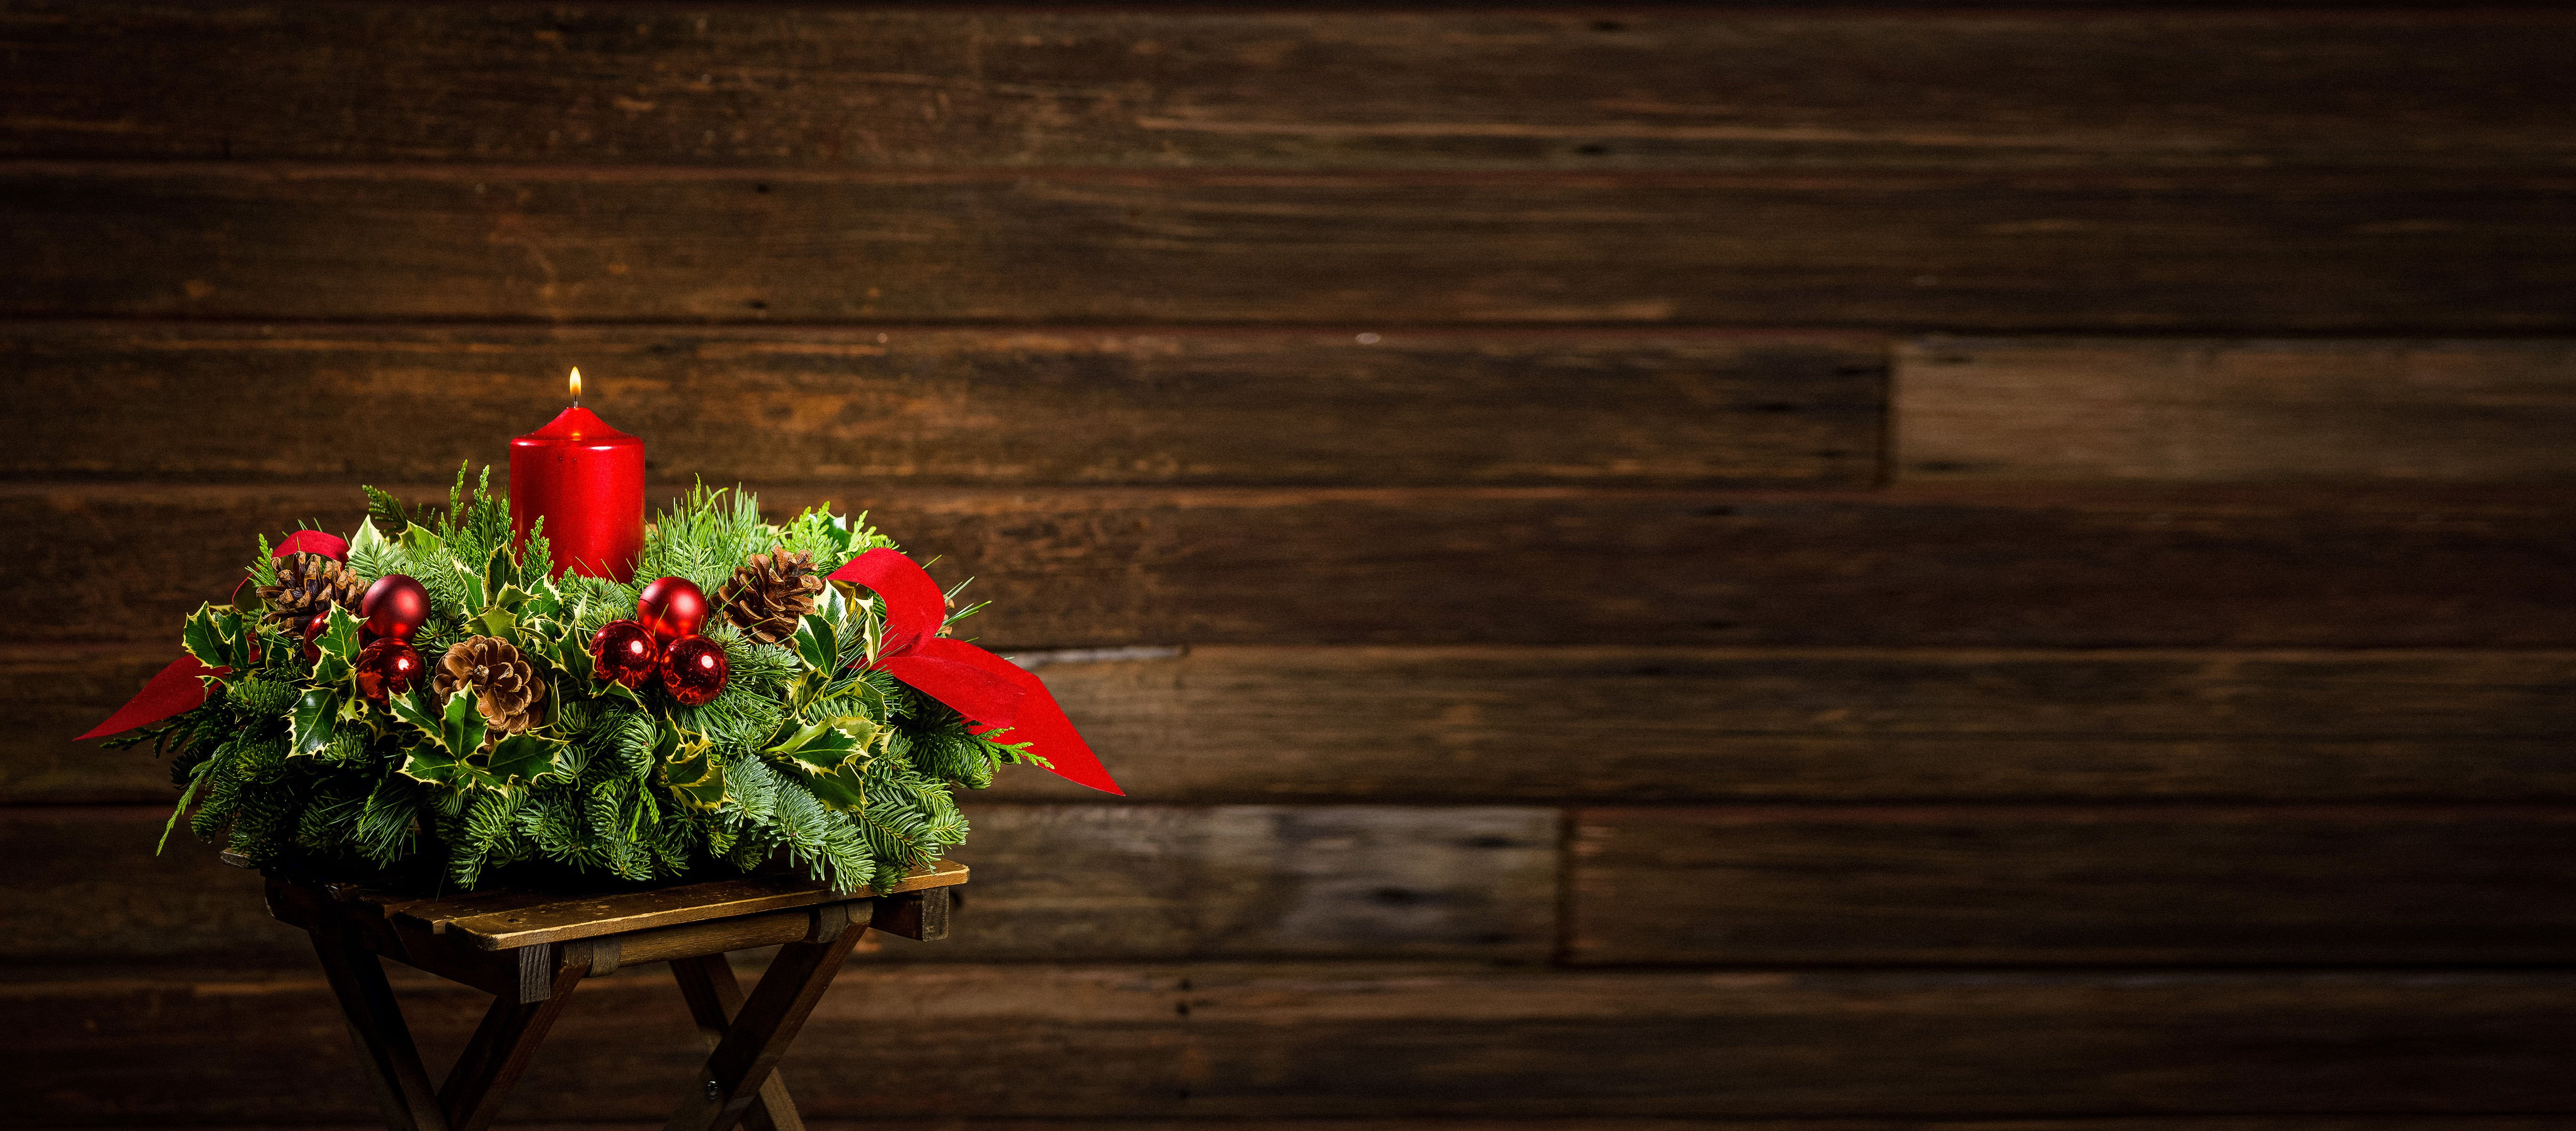 Christmas Floral Centerpieces: Tips for creating beautiful holiday